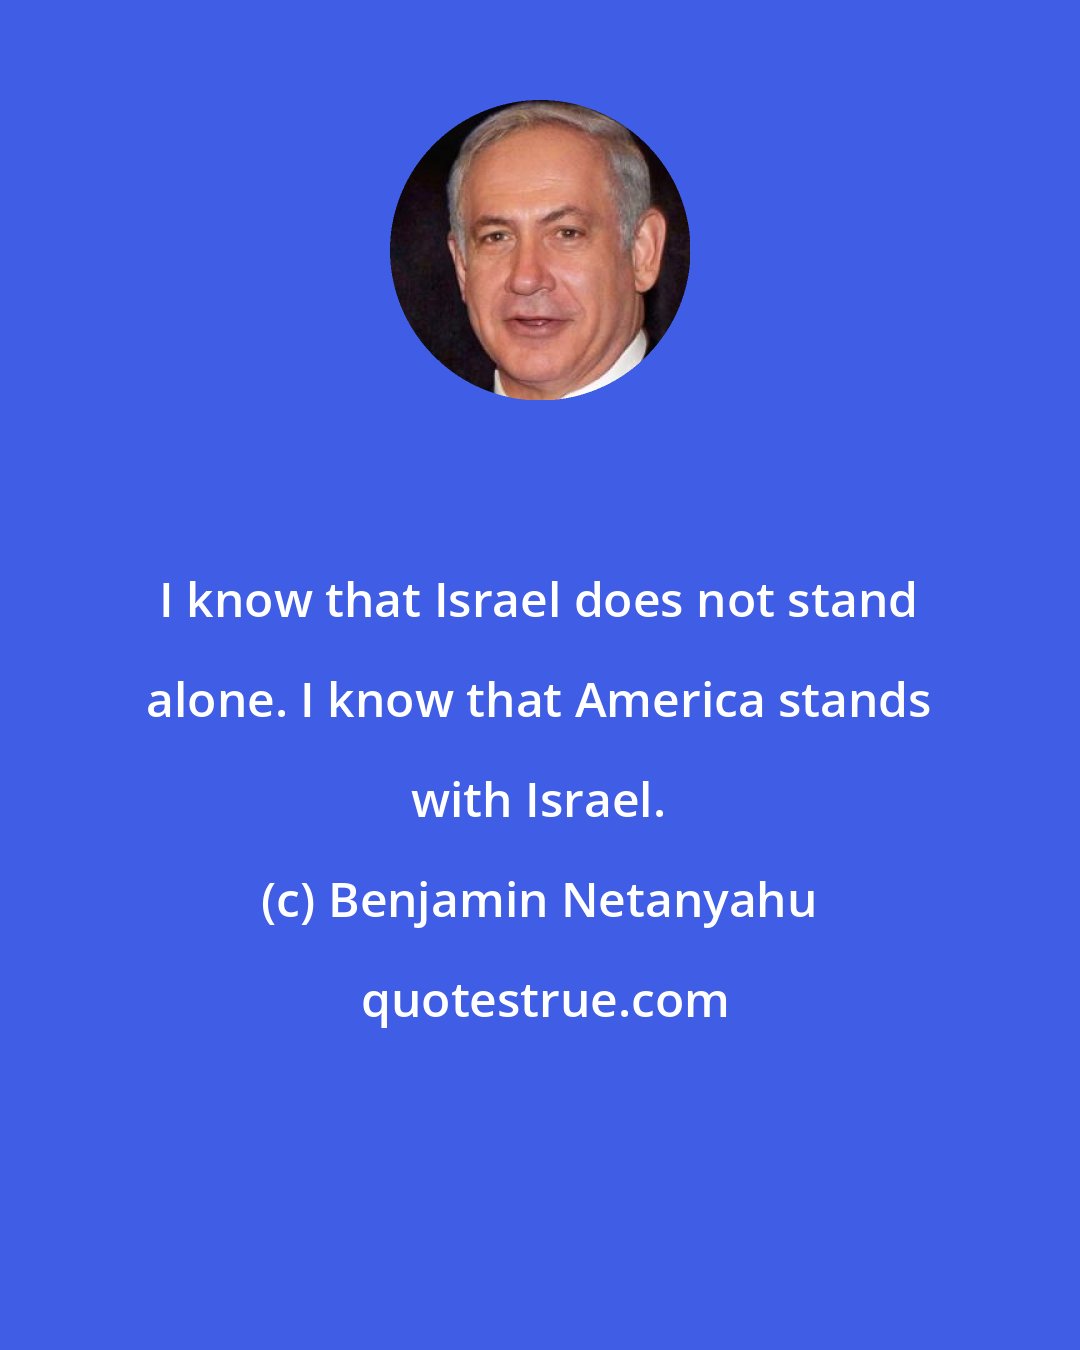 Benjamin Netanyahu: I know that Israel does not stand alone. I know that America stands with Israel.